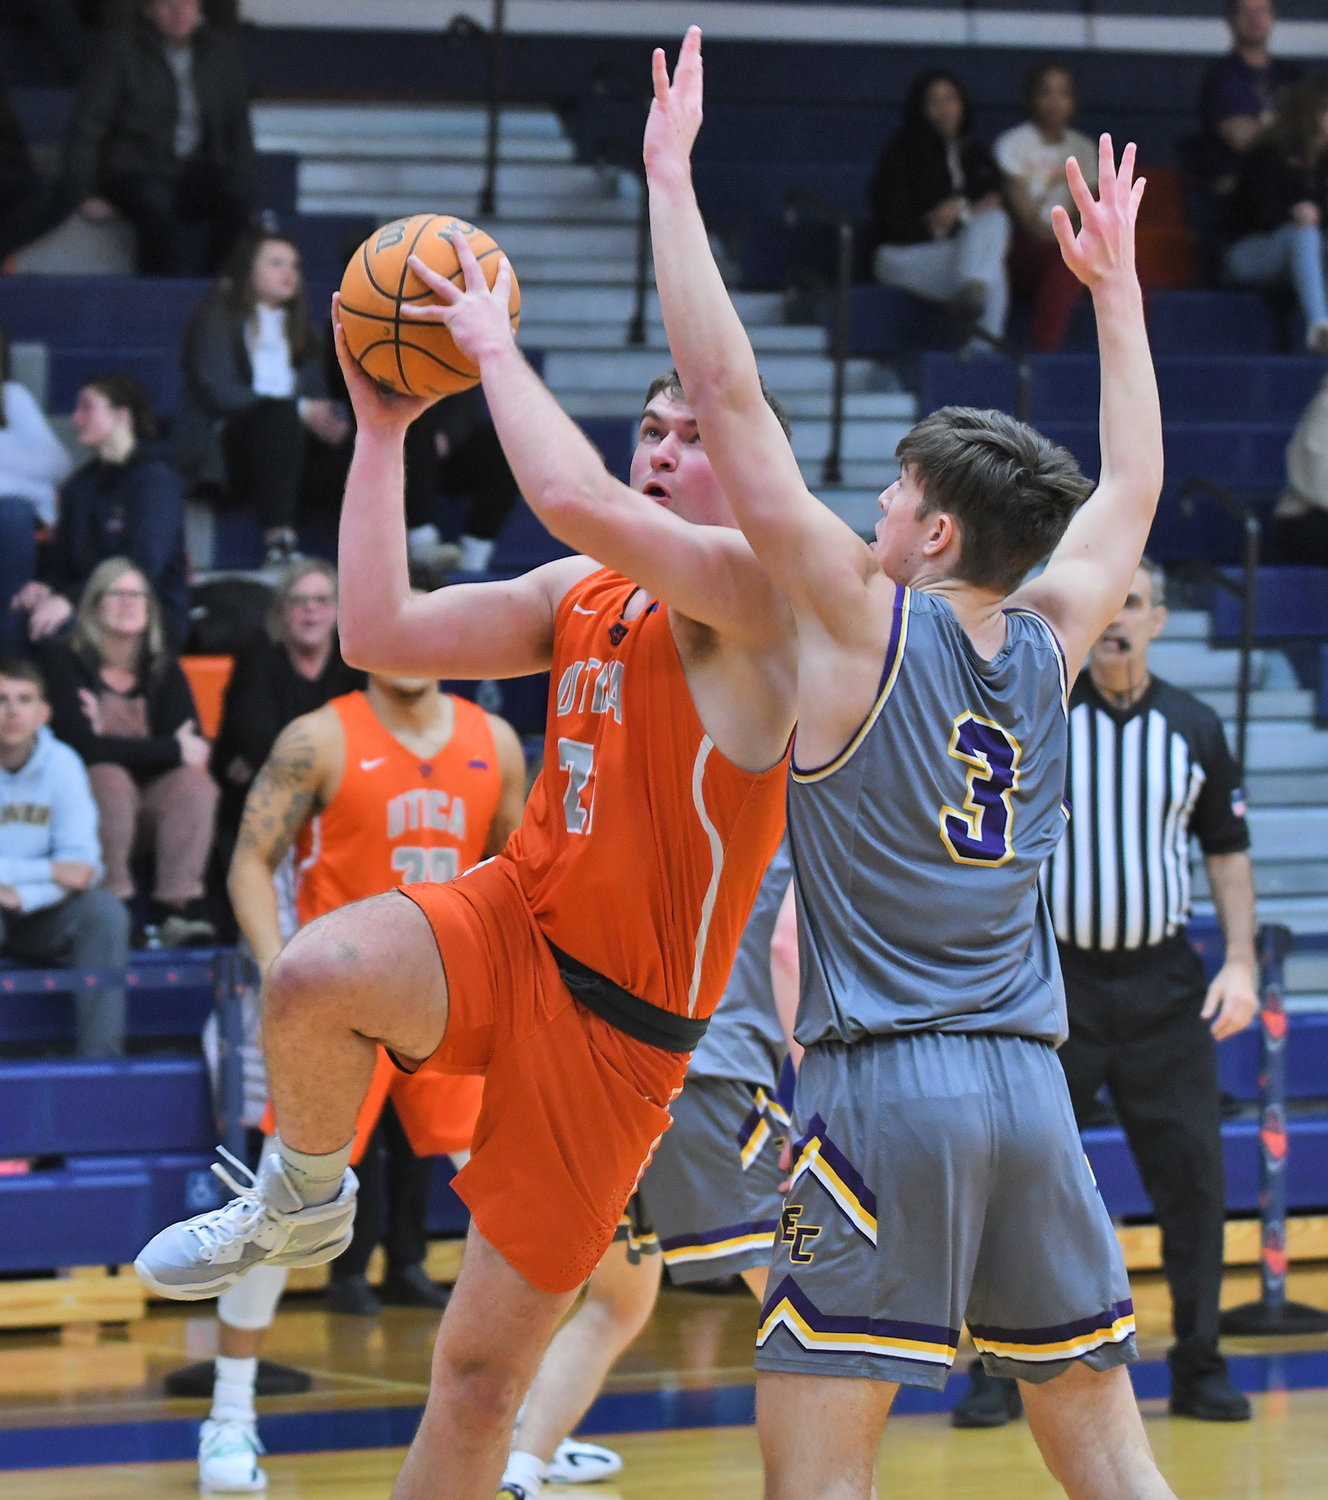 Utica University's Thomas Morreale goes up for a shot with Elmira's JJ Babcock defending during Friday night's Empire 8 game in Utica.